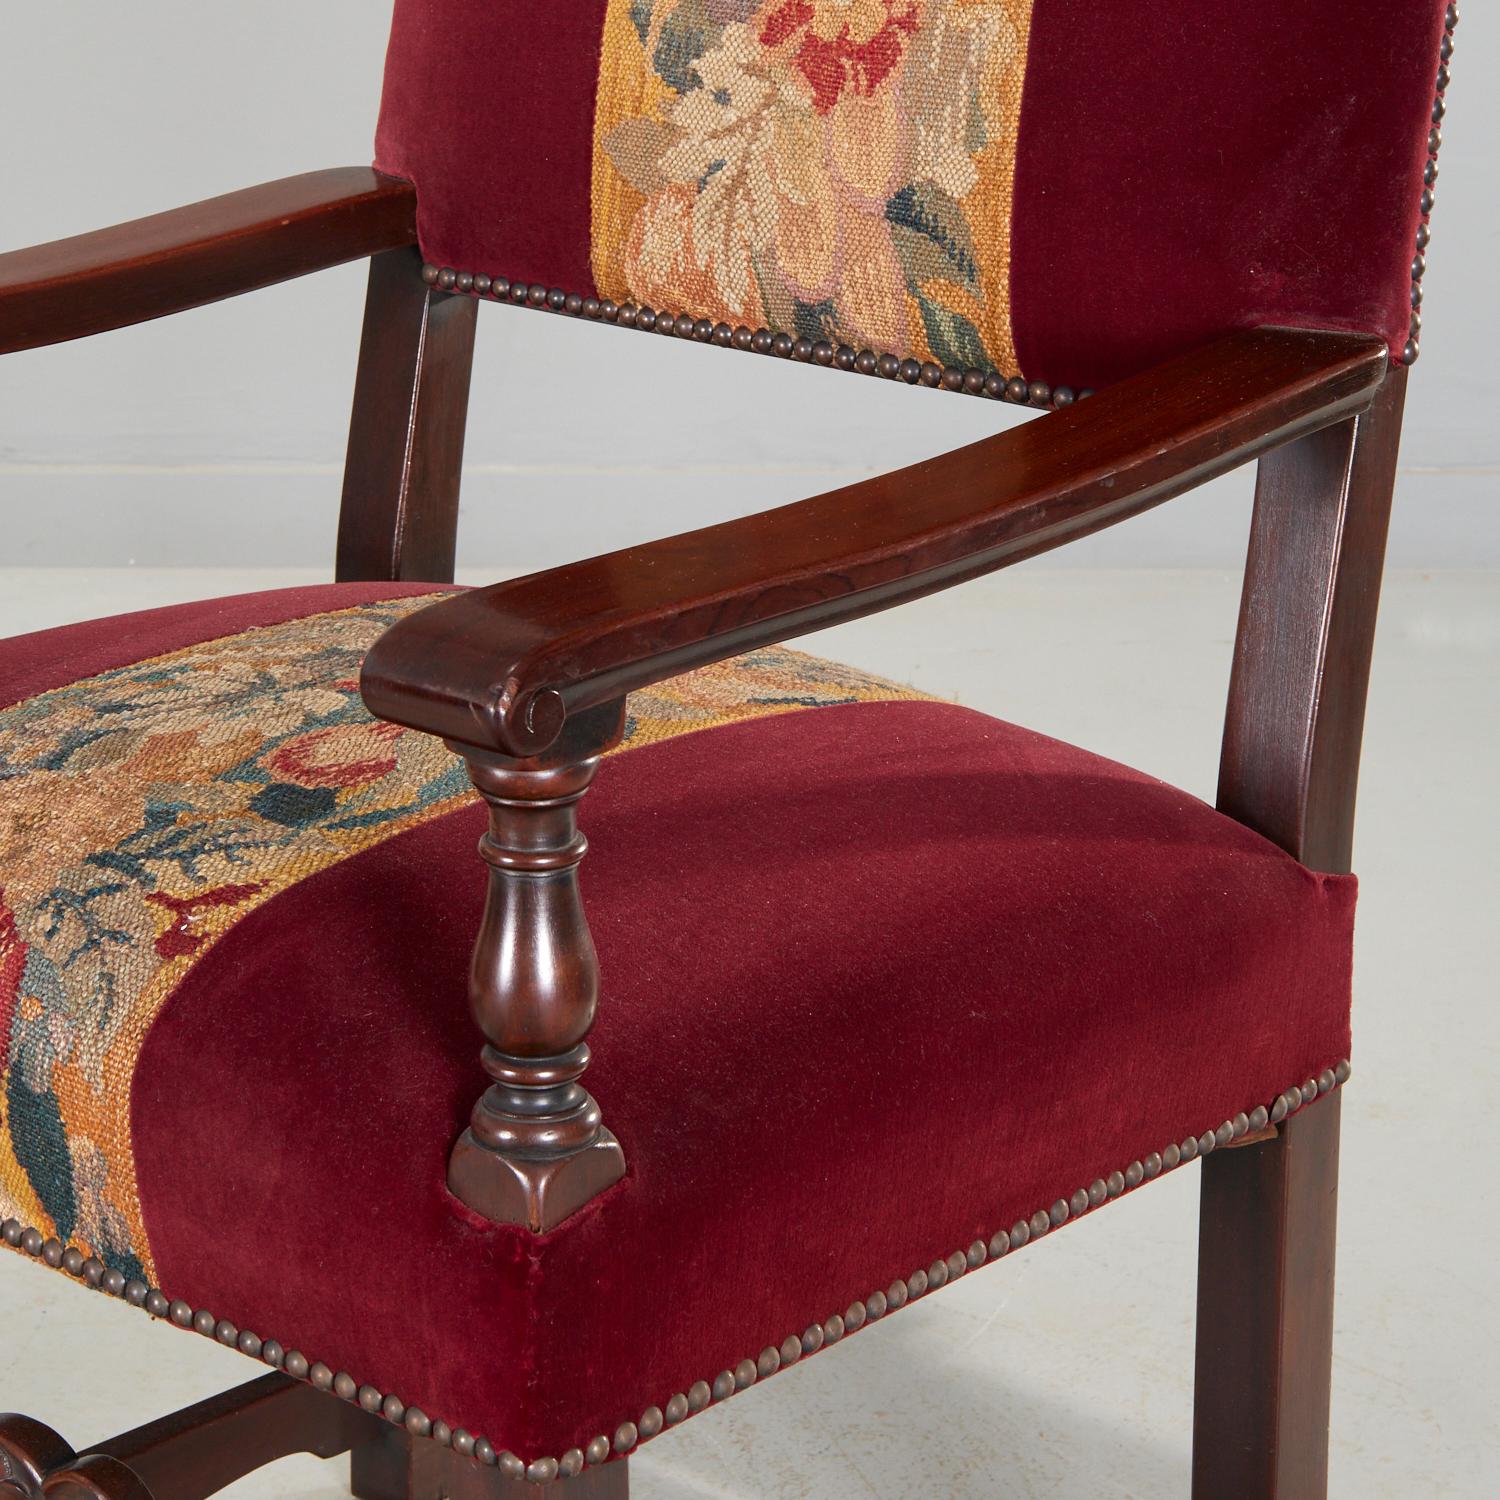 Early 20th c., a set of 8 one of a kind dining chairs by expert NYC cabinet makers Schmieg, Hungate and Kotzian in the Italian Baroque style, incl. (2) armchairs, (6) side chairs. All are covered in a rich wine red velvet with a central tapestry